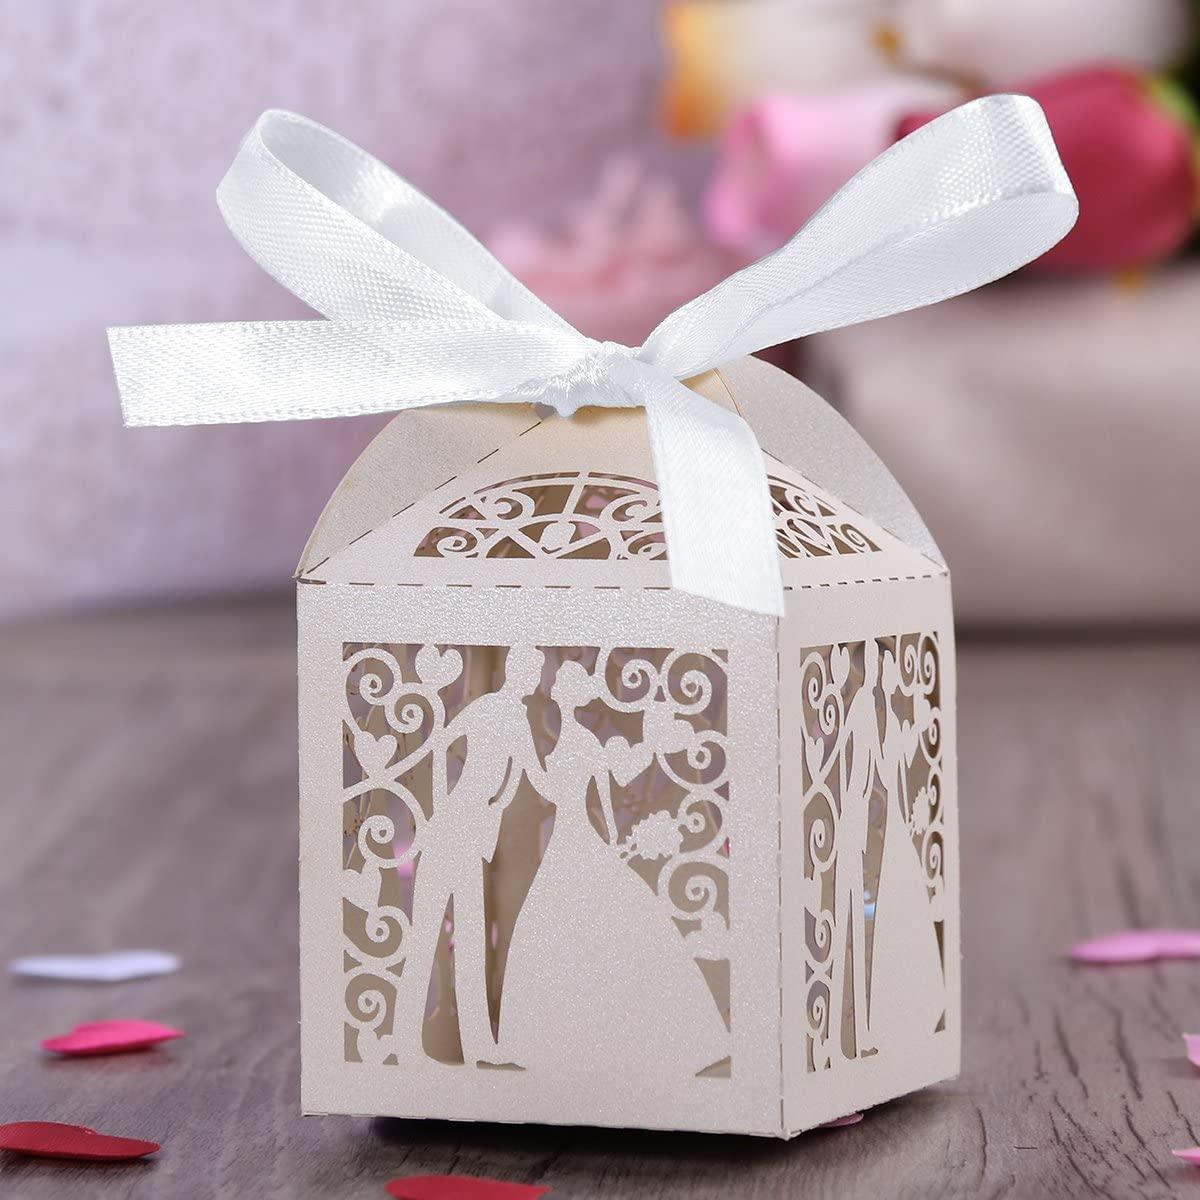 100pcs Wedding Candy Boxes Couple Design Luxury Lase Cut Party Wedding Favor Ribbon Candy Boxes - If you say i do